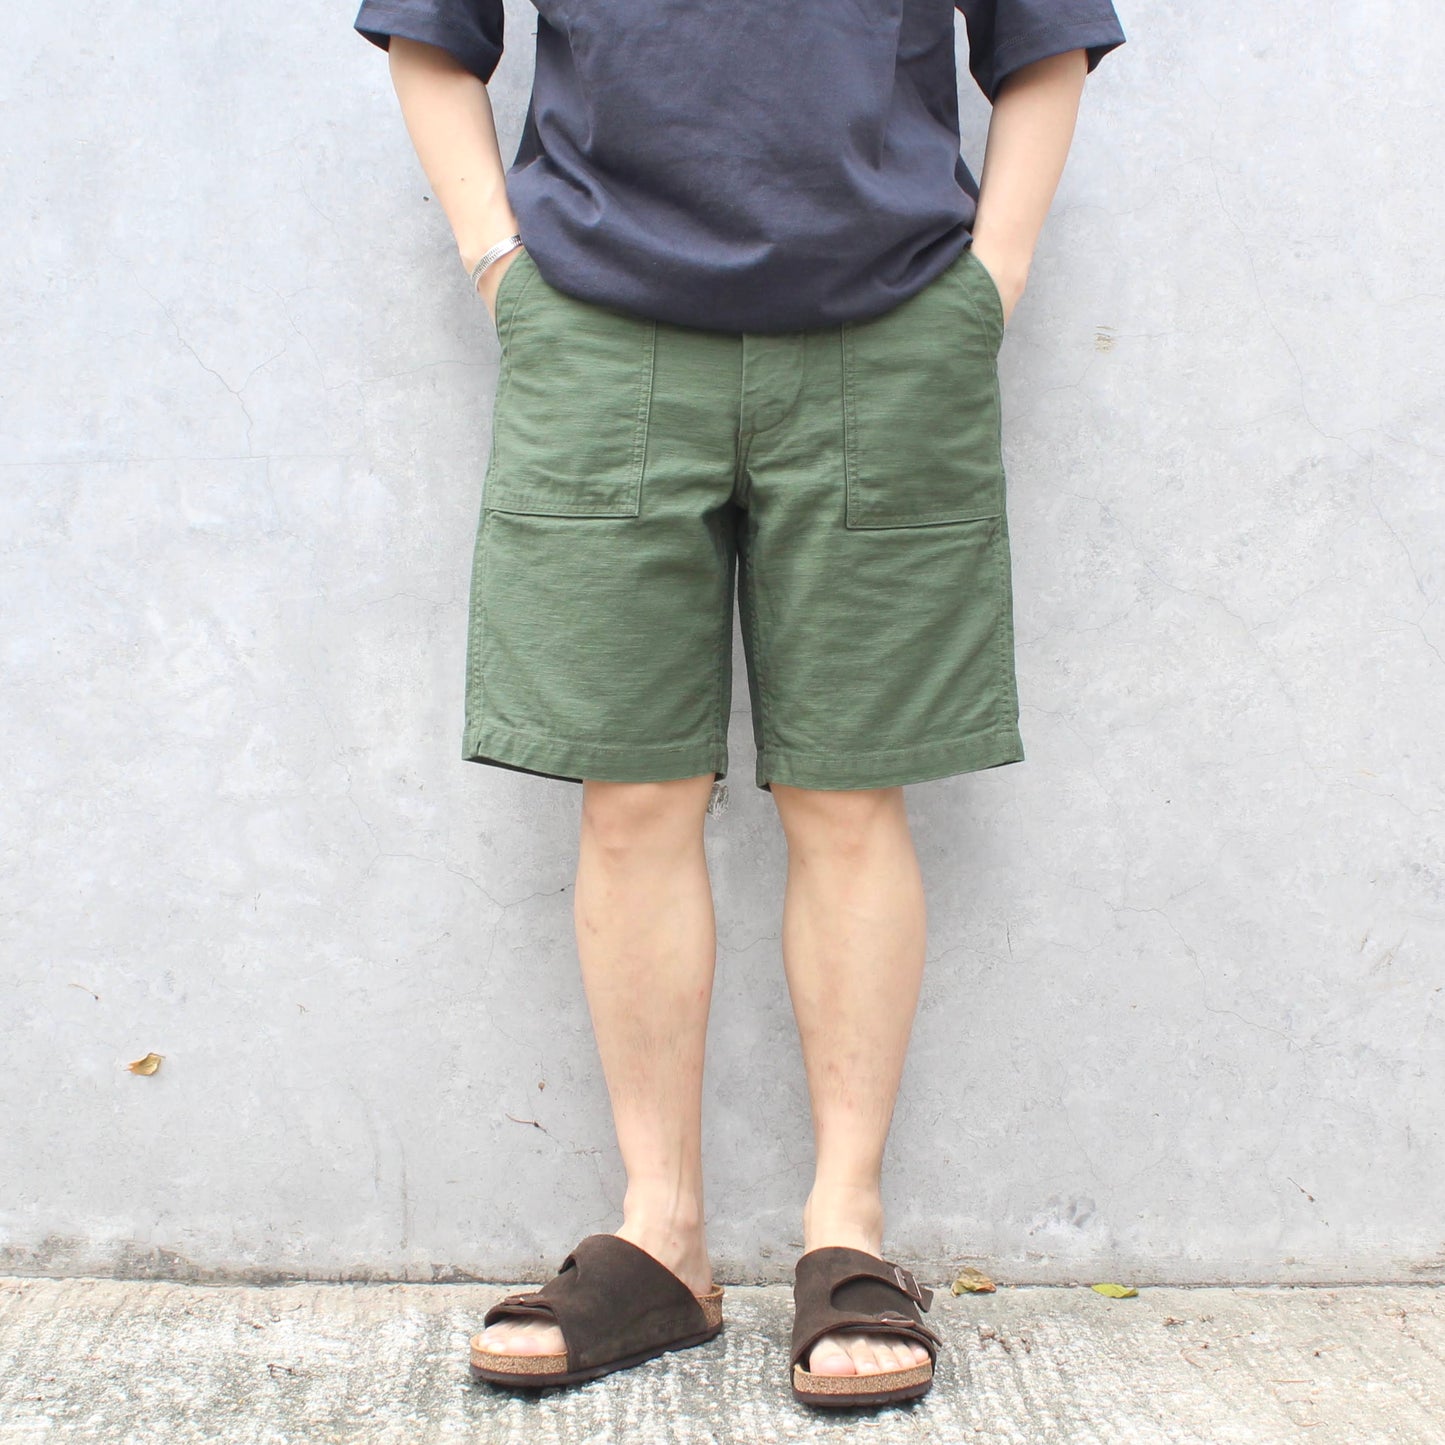 Or Slow - US ARMY FATIGUE SHORTS